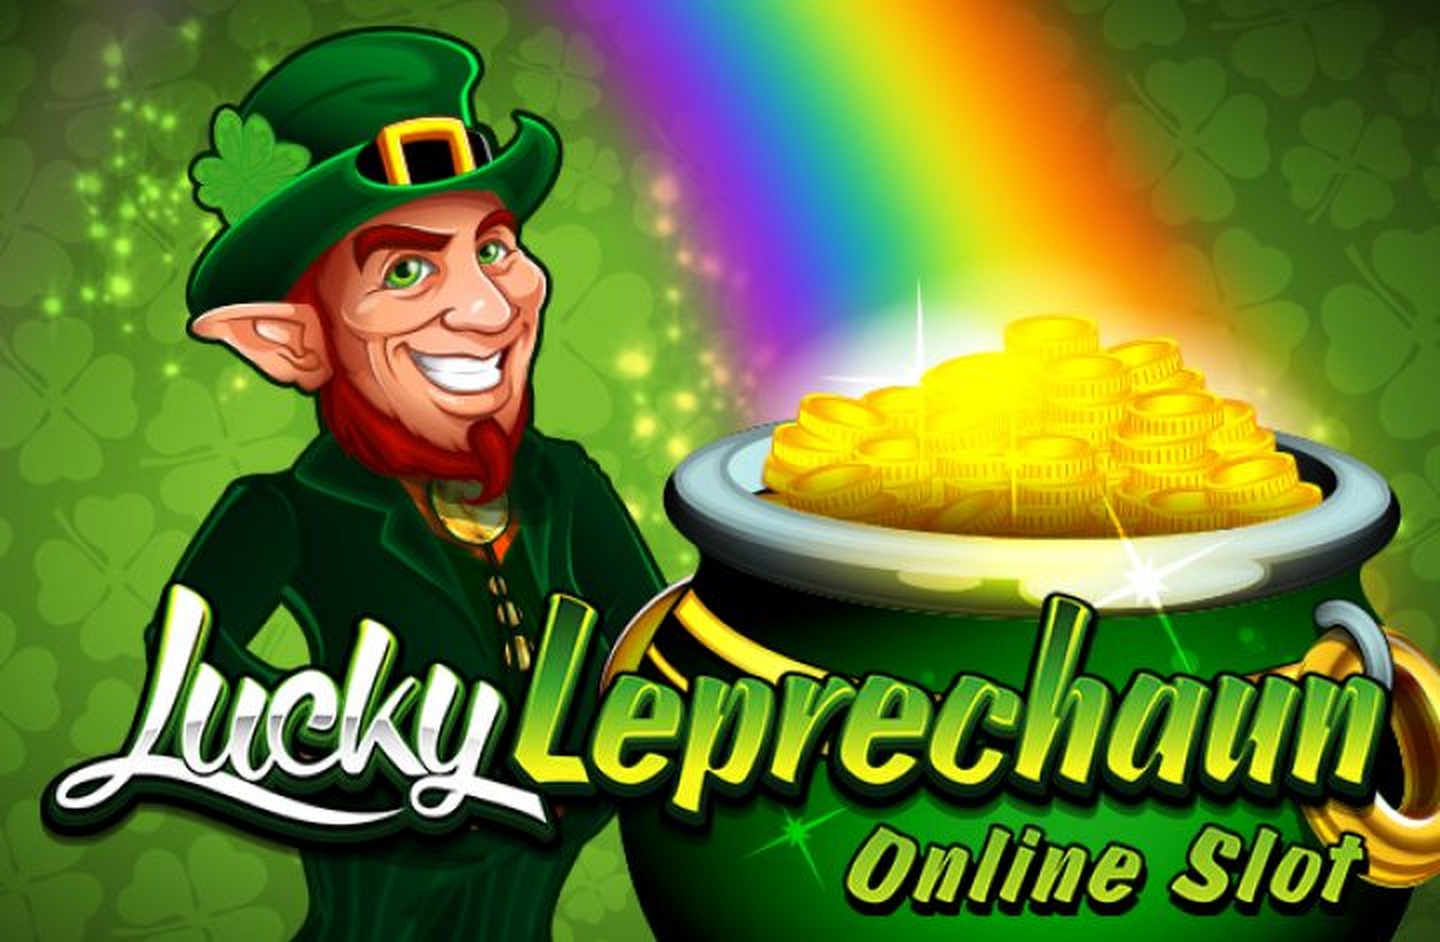 The Lucky Leprechaun Online Slot Demo Game by Microgaming